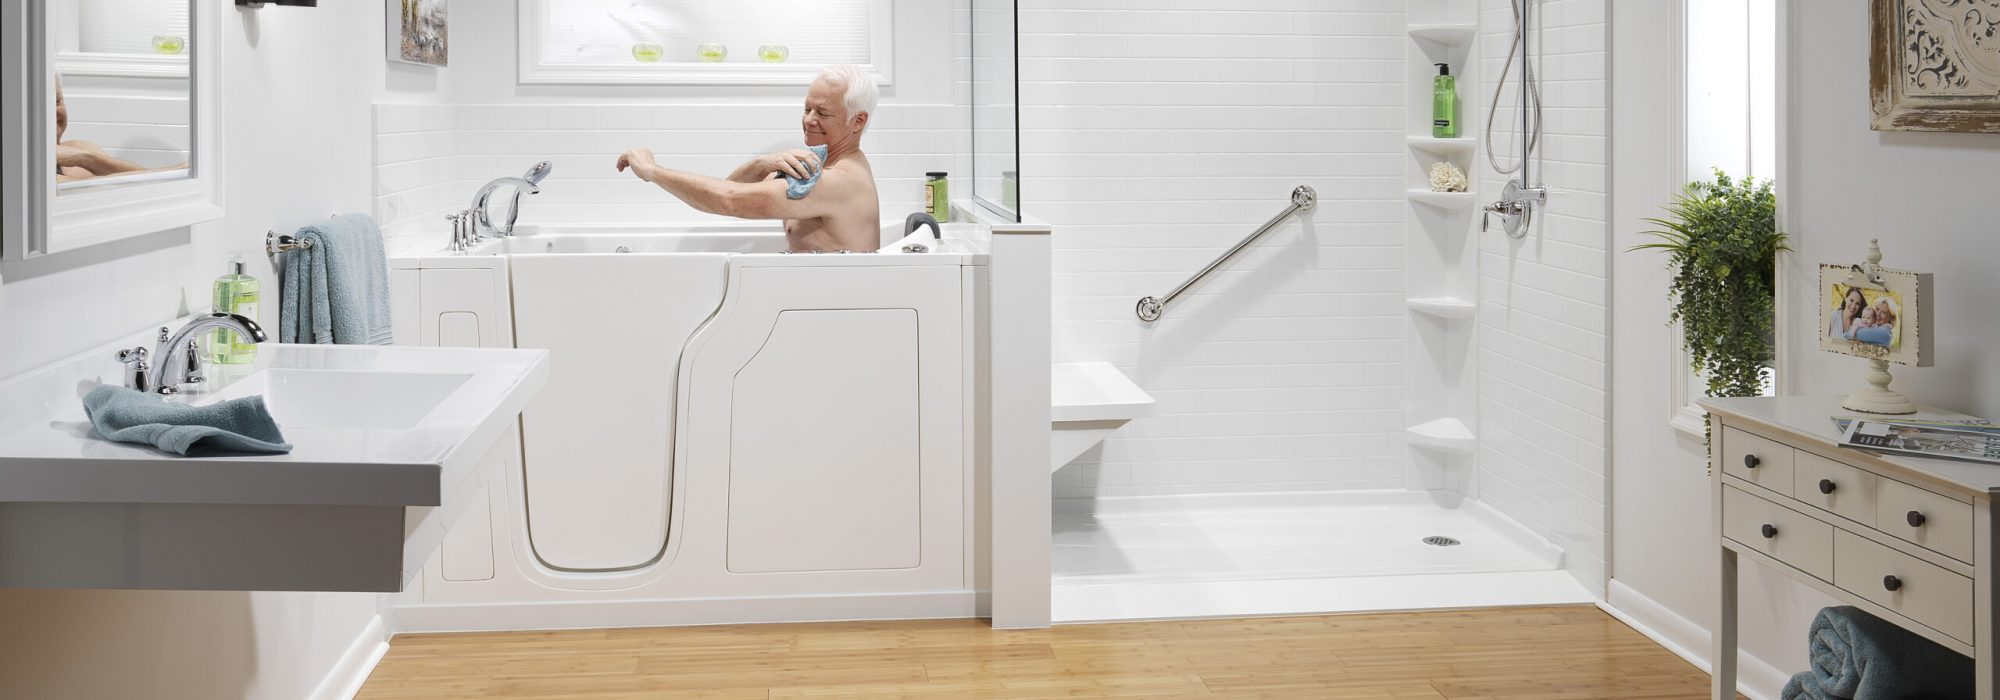 Walk-In Tub with man bathing for hydrotherapy benefits